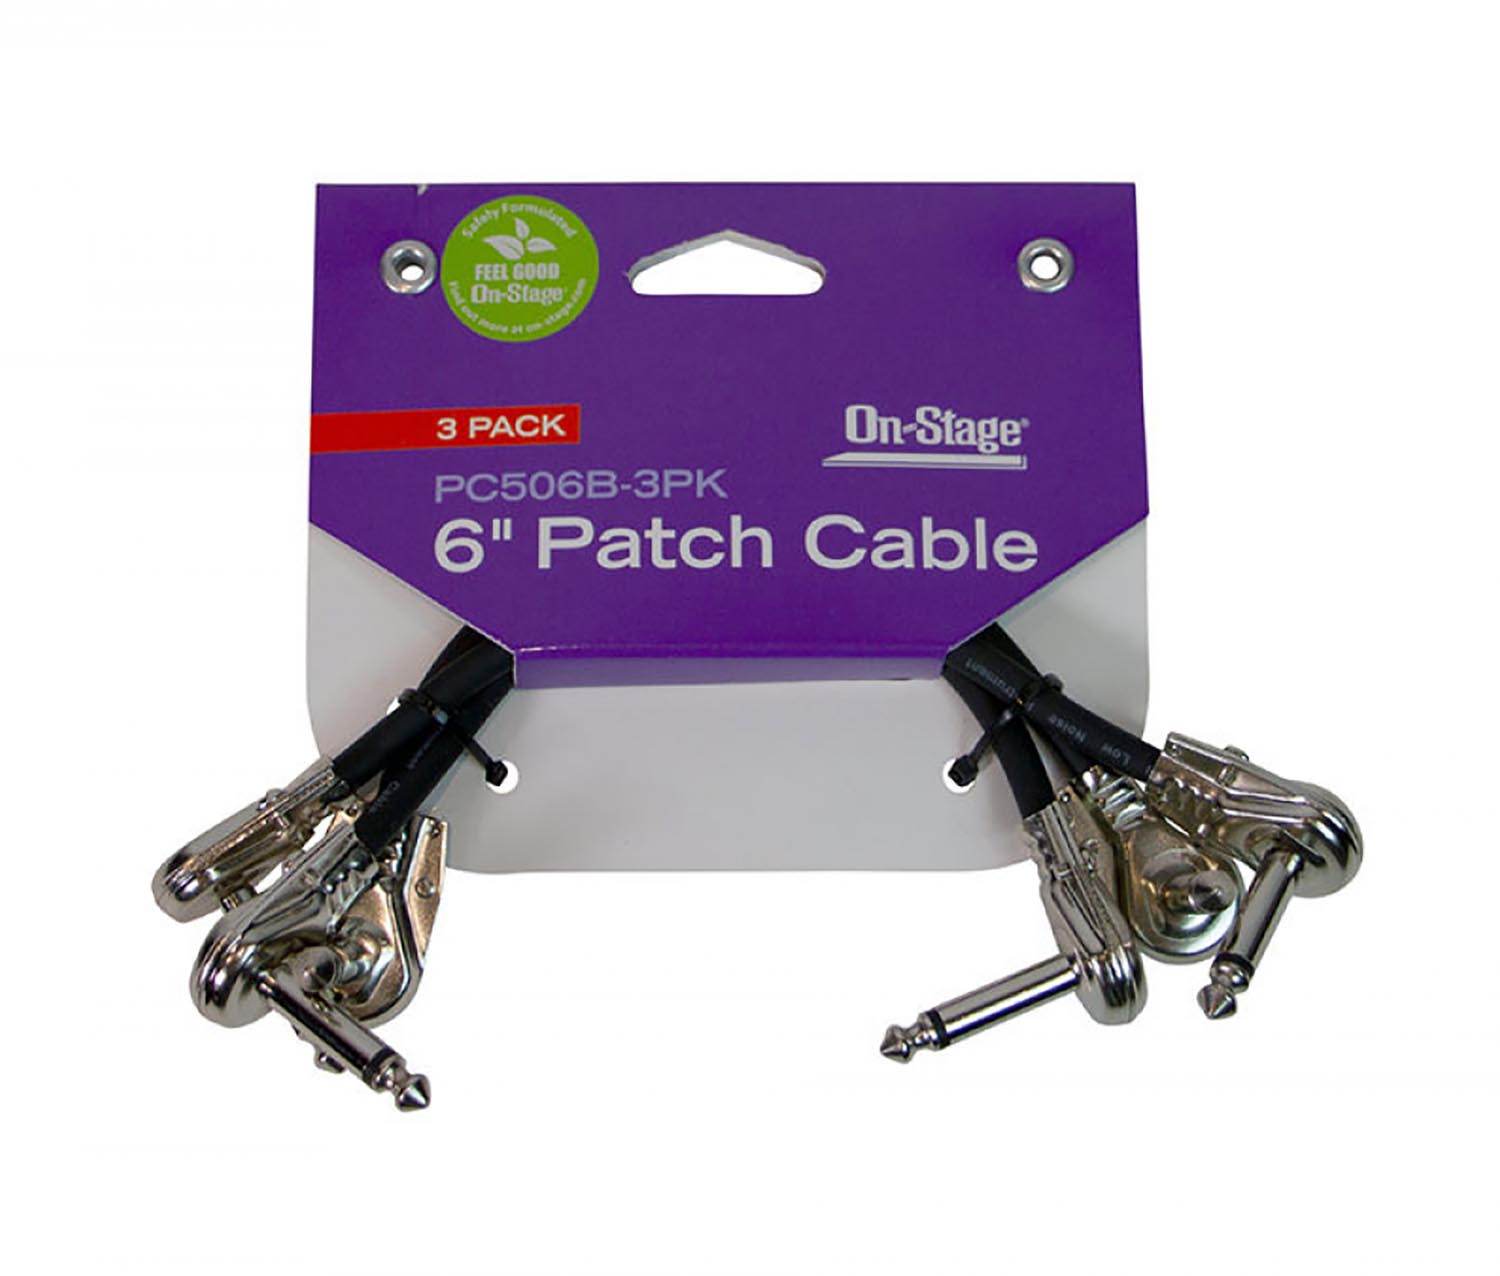 On Stage PC506B-3PK, 6" Patch Cable with Pancake Connectors in Black - 3 Pack - Hollywood DJ